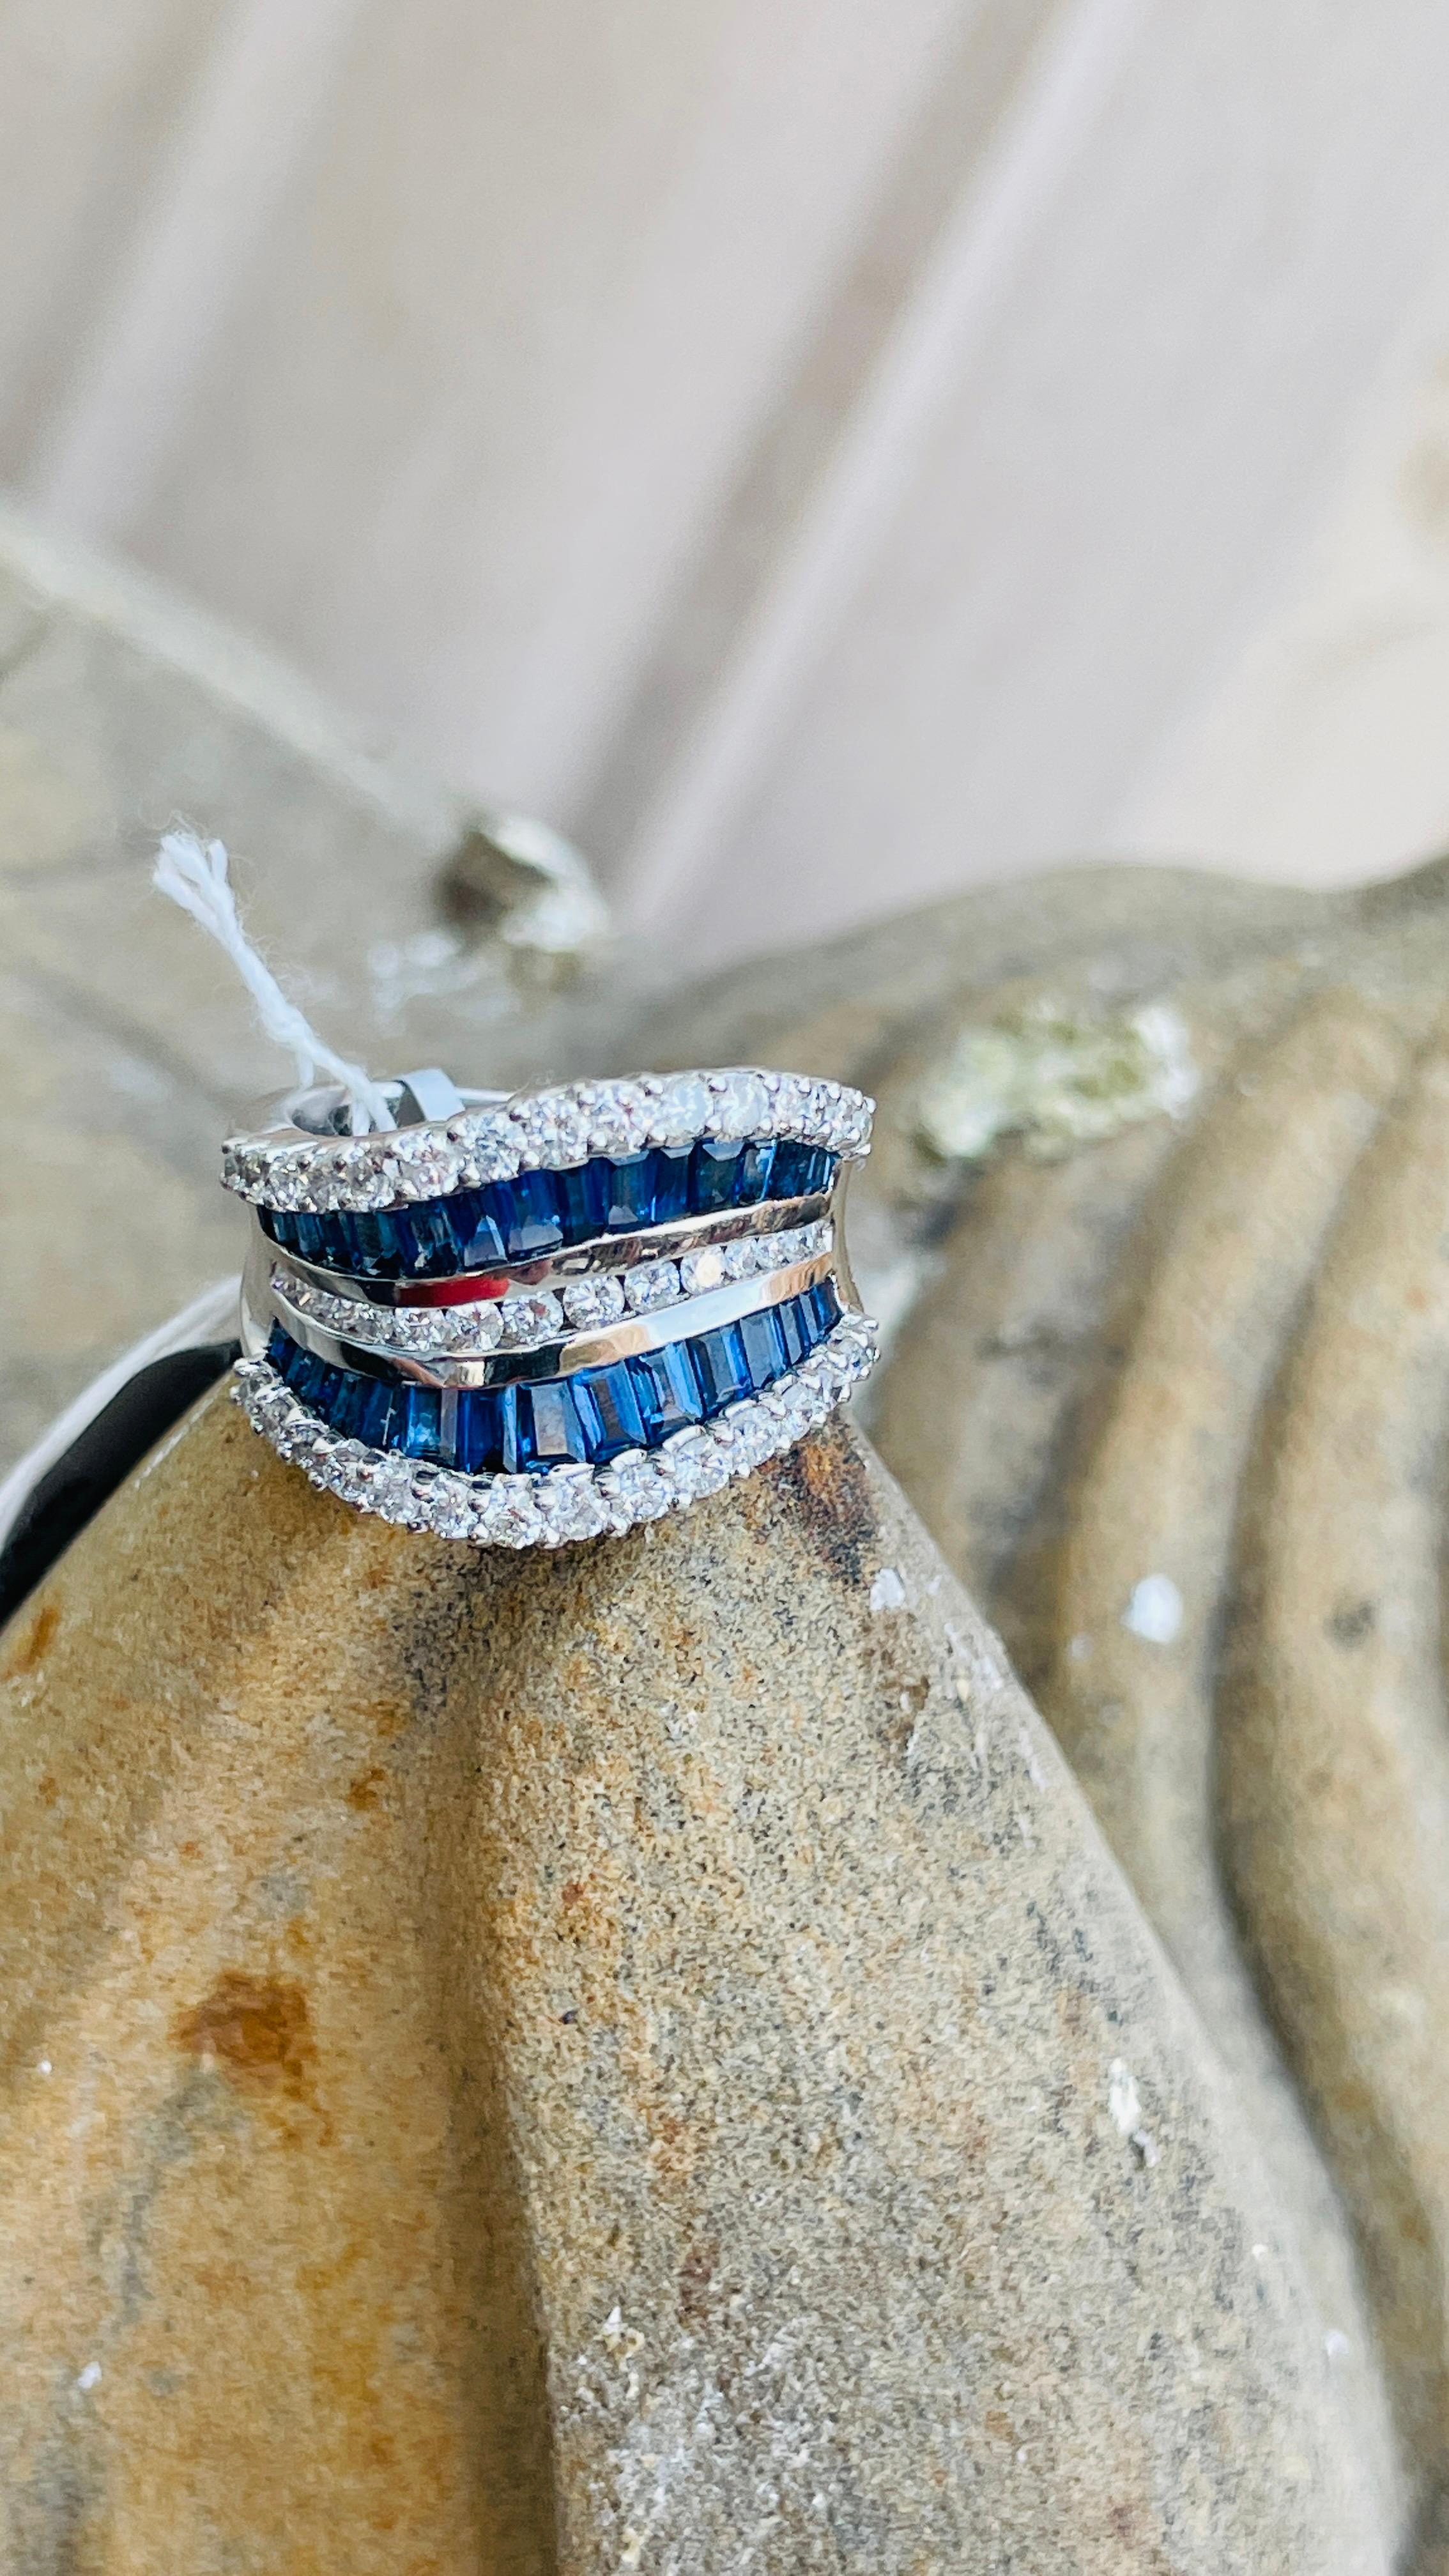 For Sale:  2.65 Carat Blue Sapphire and Diamond Cocktail Ring in 14 Karat White Gold 8